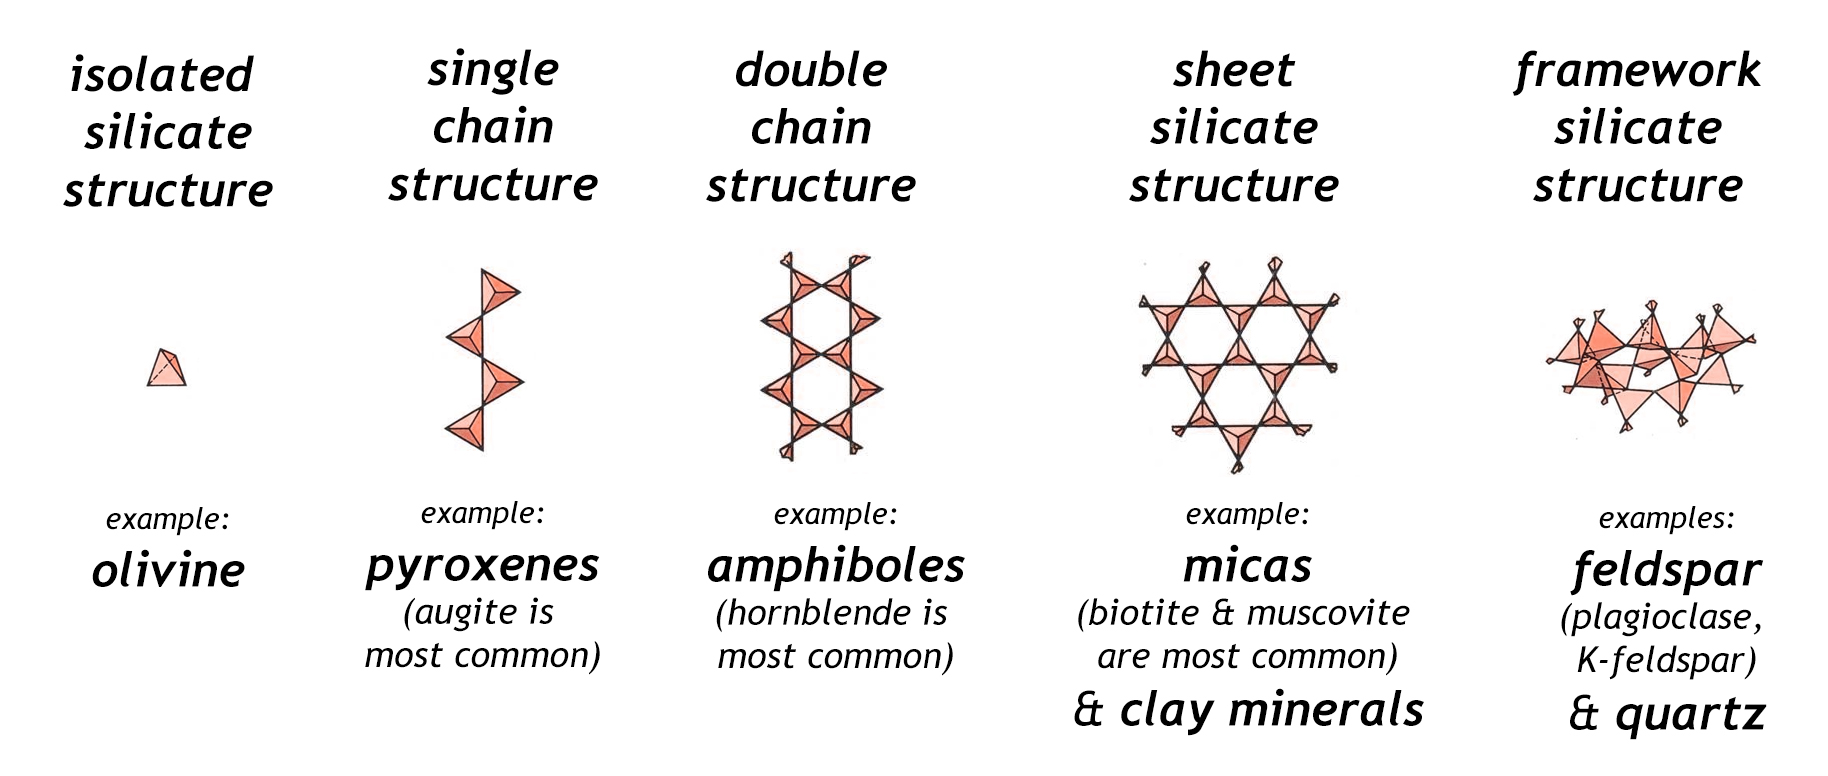 The various crystal structures of silicate minerals. By Callan Bentley.